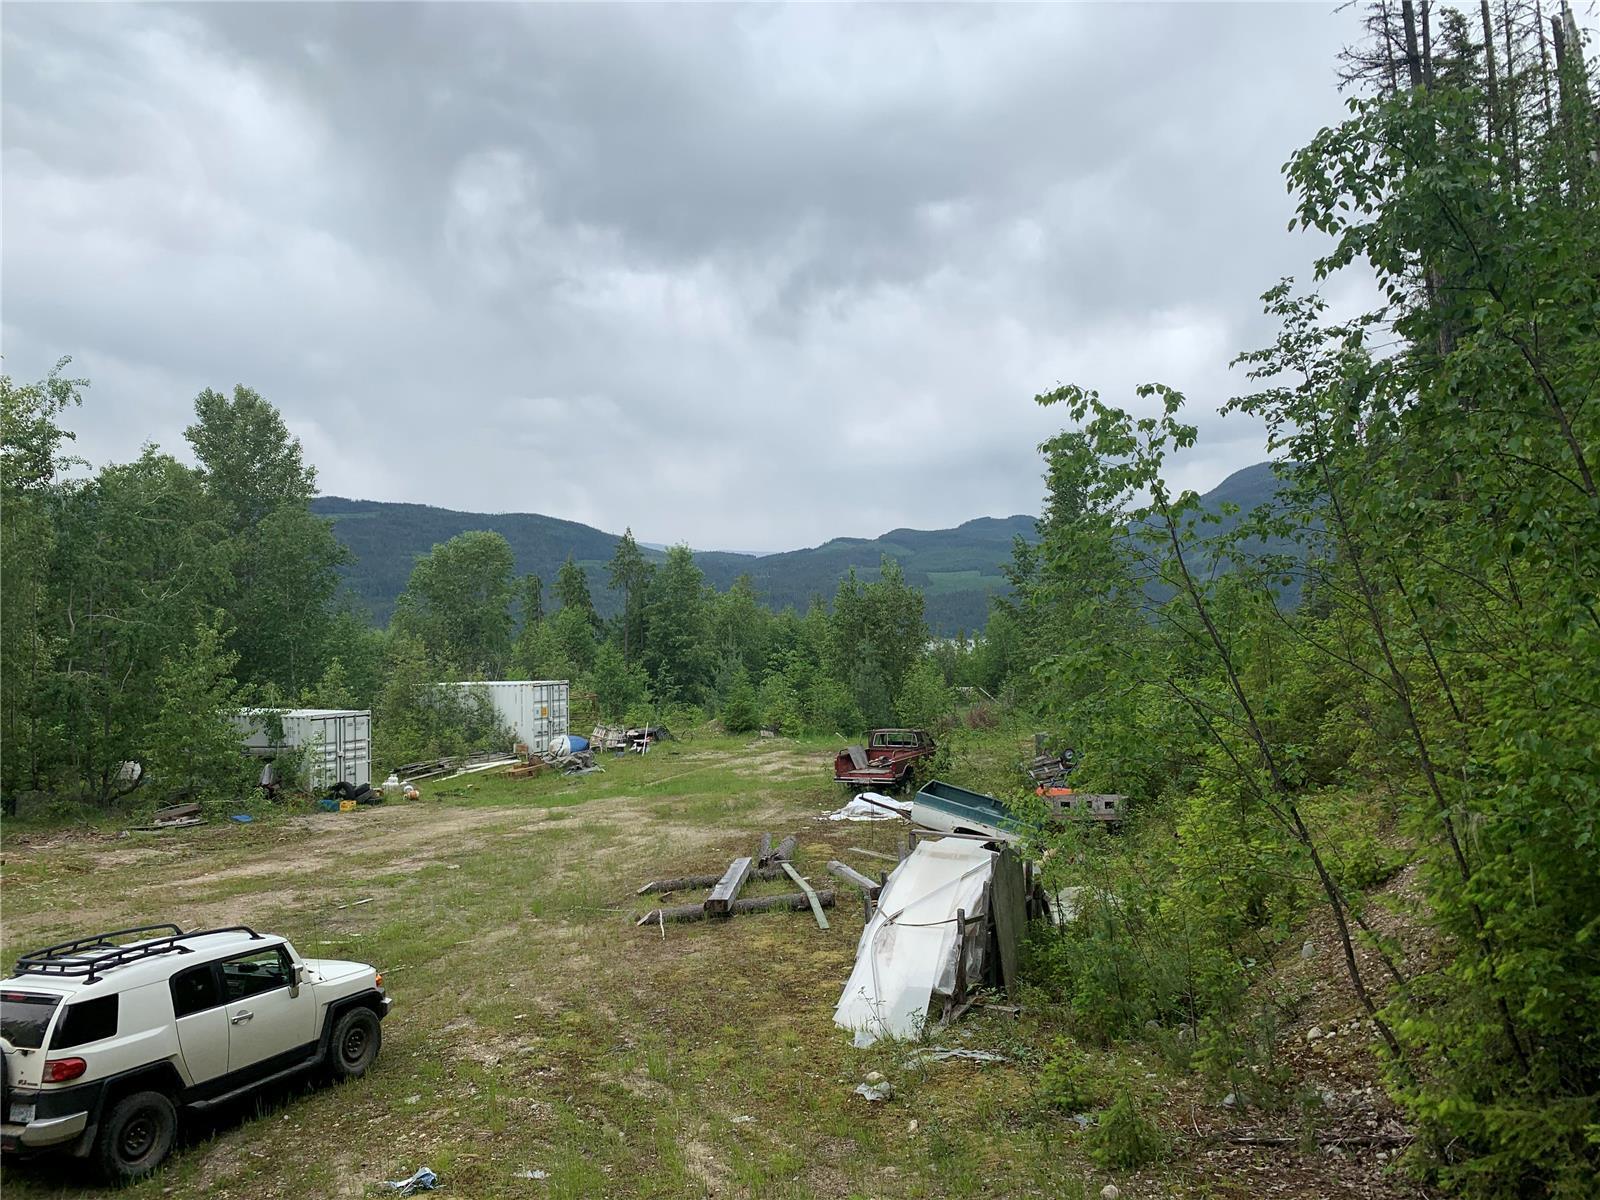      Lot 8 Willow On Anstey Bay Bay  , Sicamous, Shuswap / Revelstoke,  ;  Listing Number: MLS 10255879